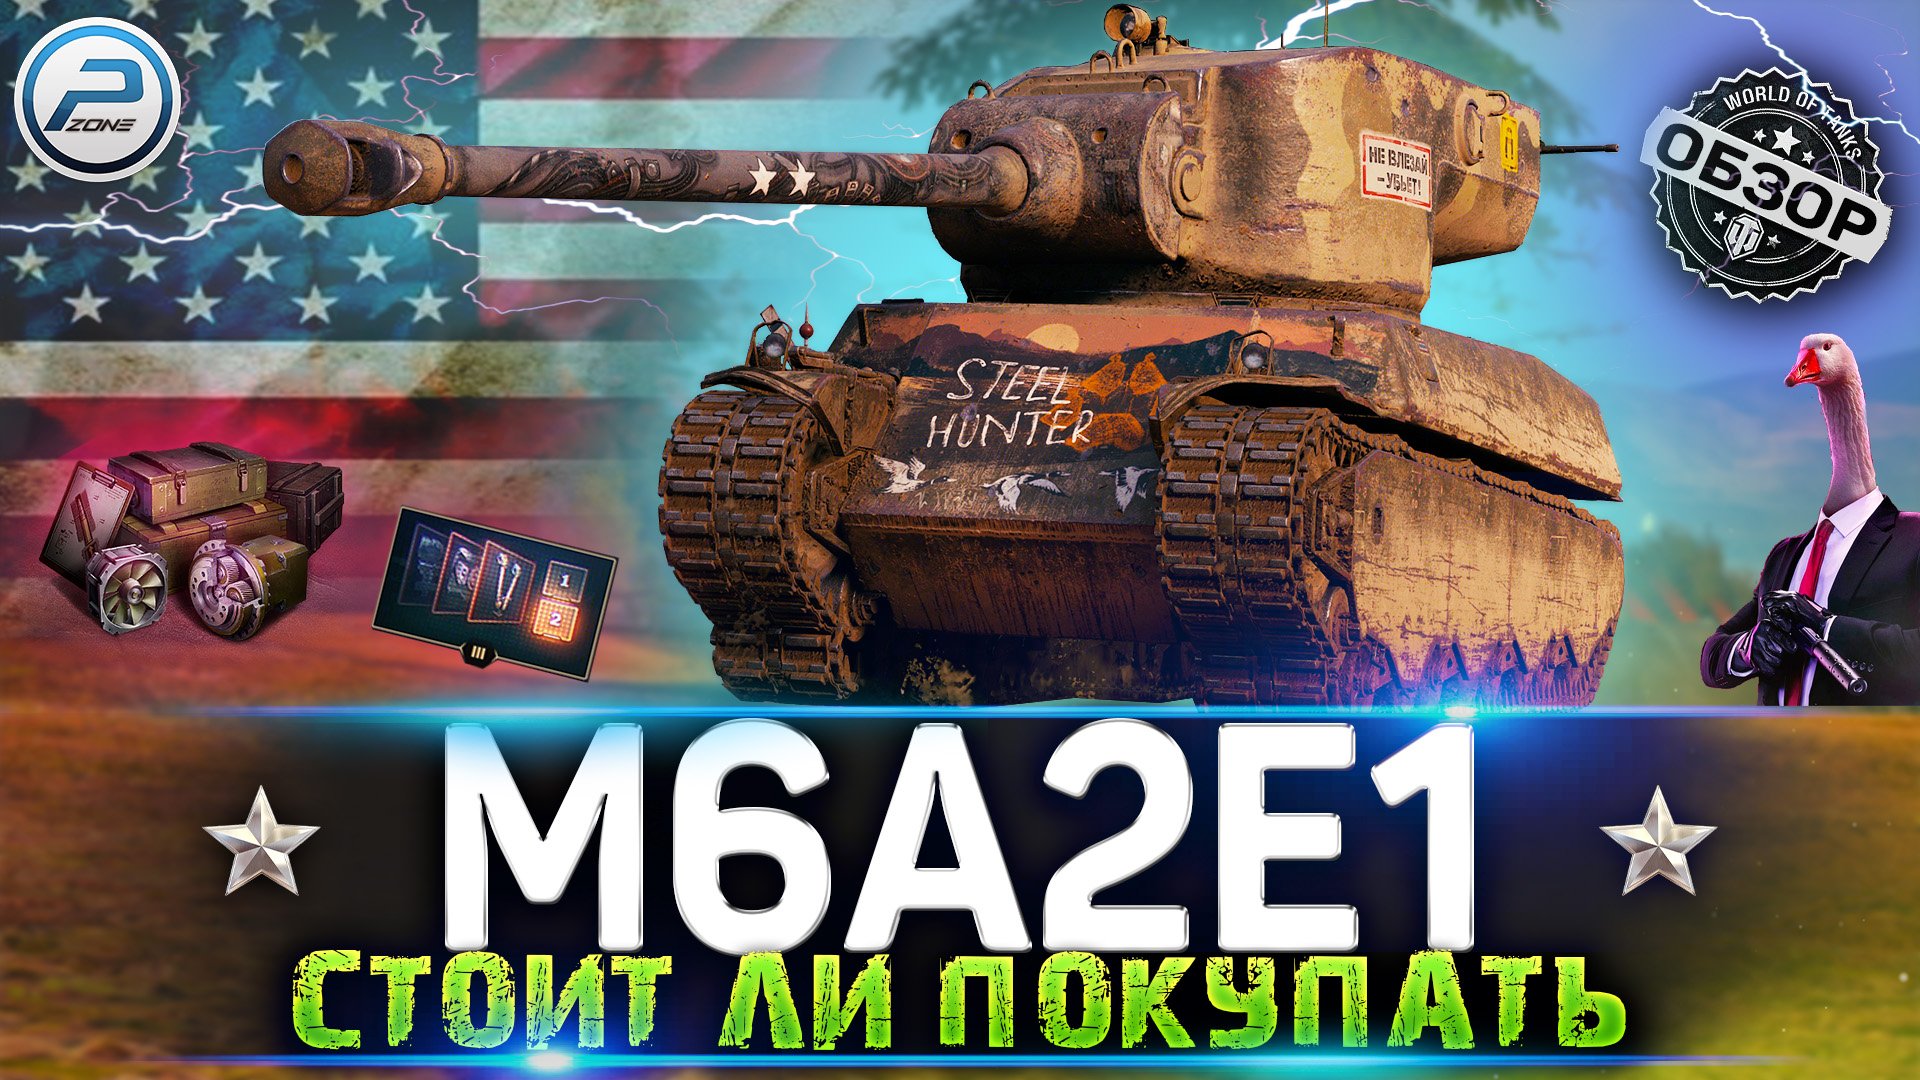 ОБЗОР M6A2E1 WoT ✮ ГУСЬ РВЕТ РАНДОМ ✮ WORLD OF TANKS